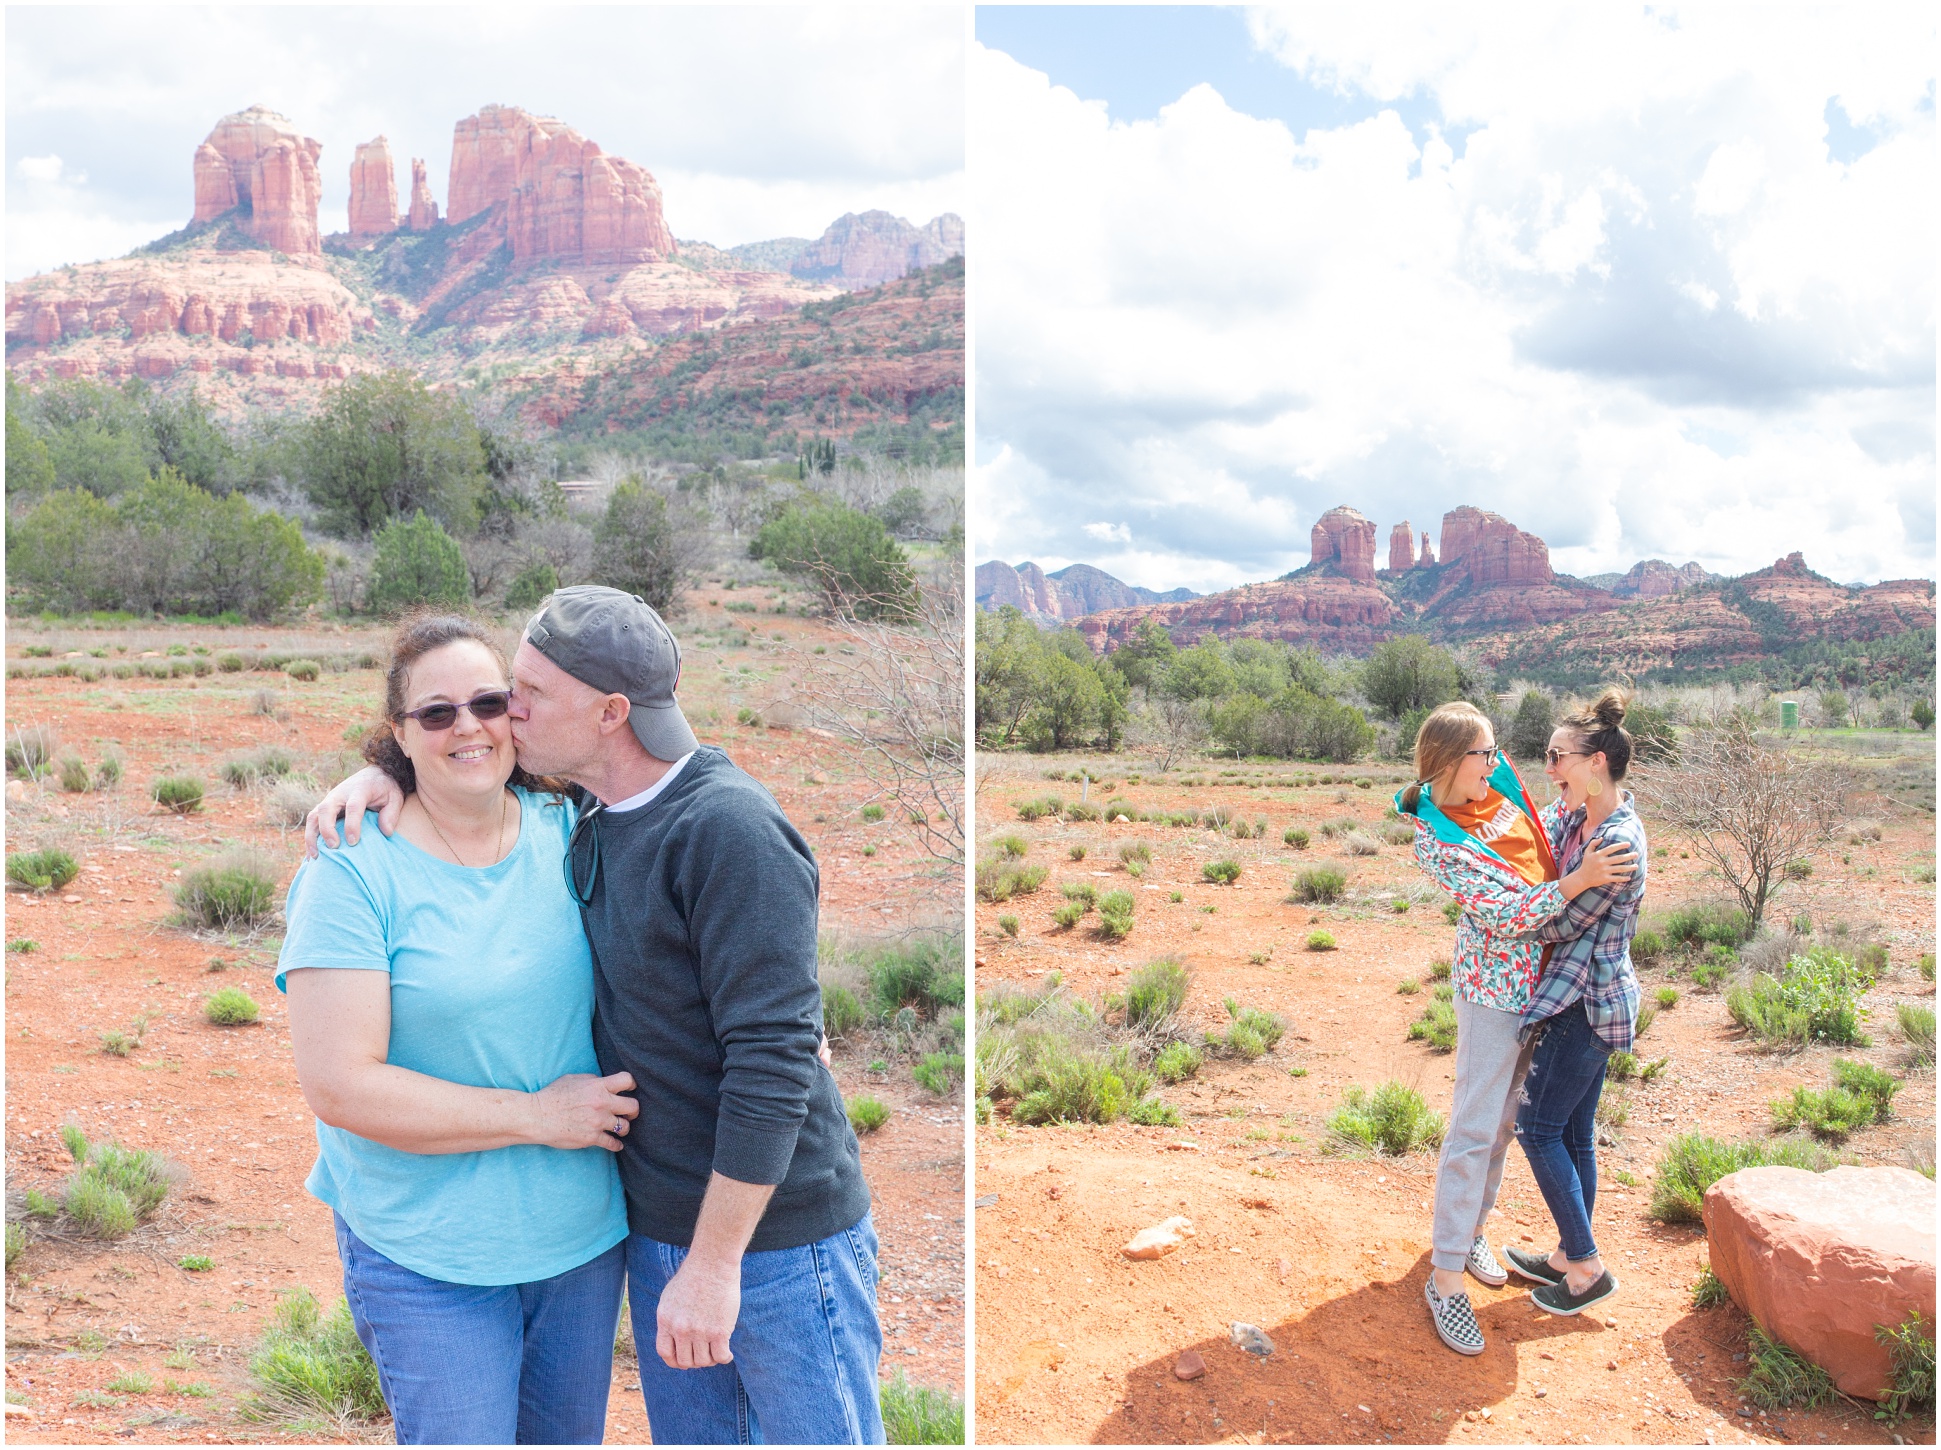 Two Images of Family members in front of the red rocks in Sedona